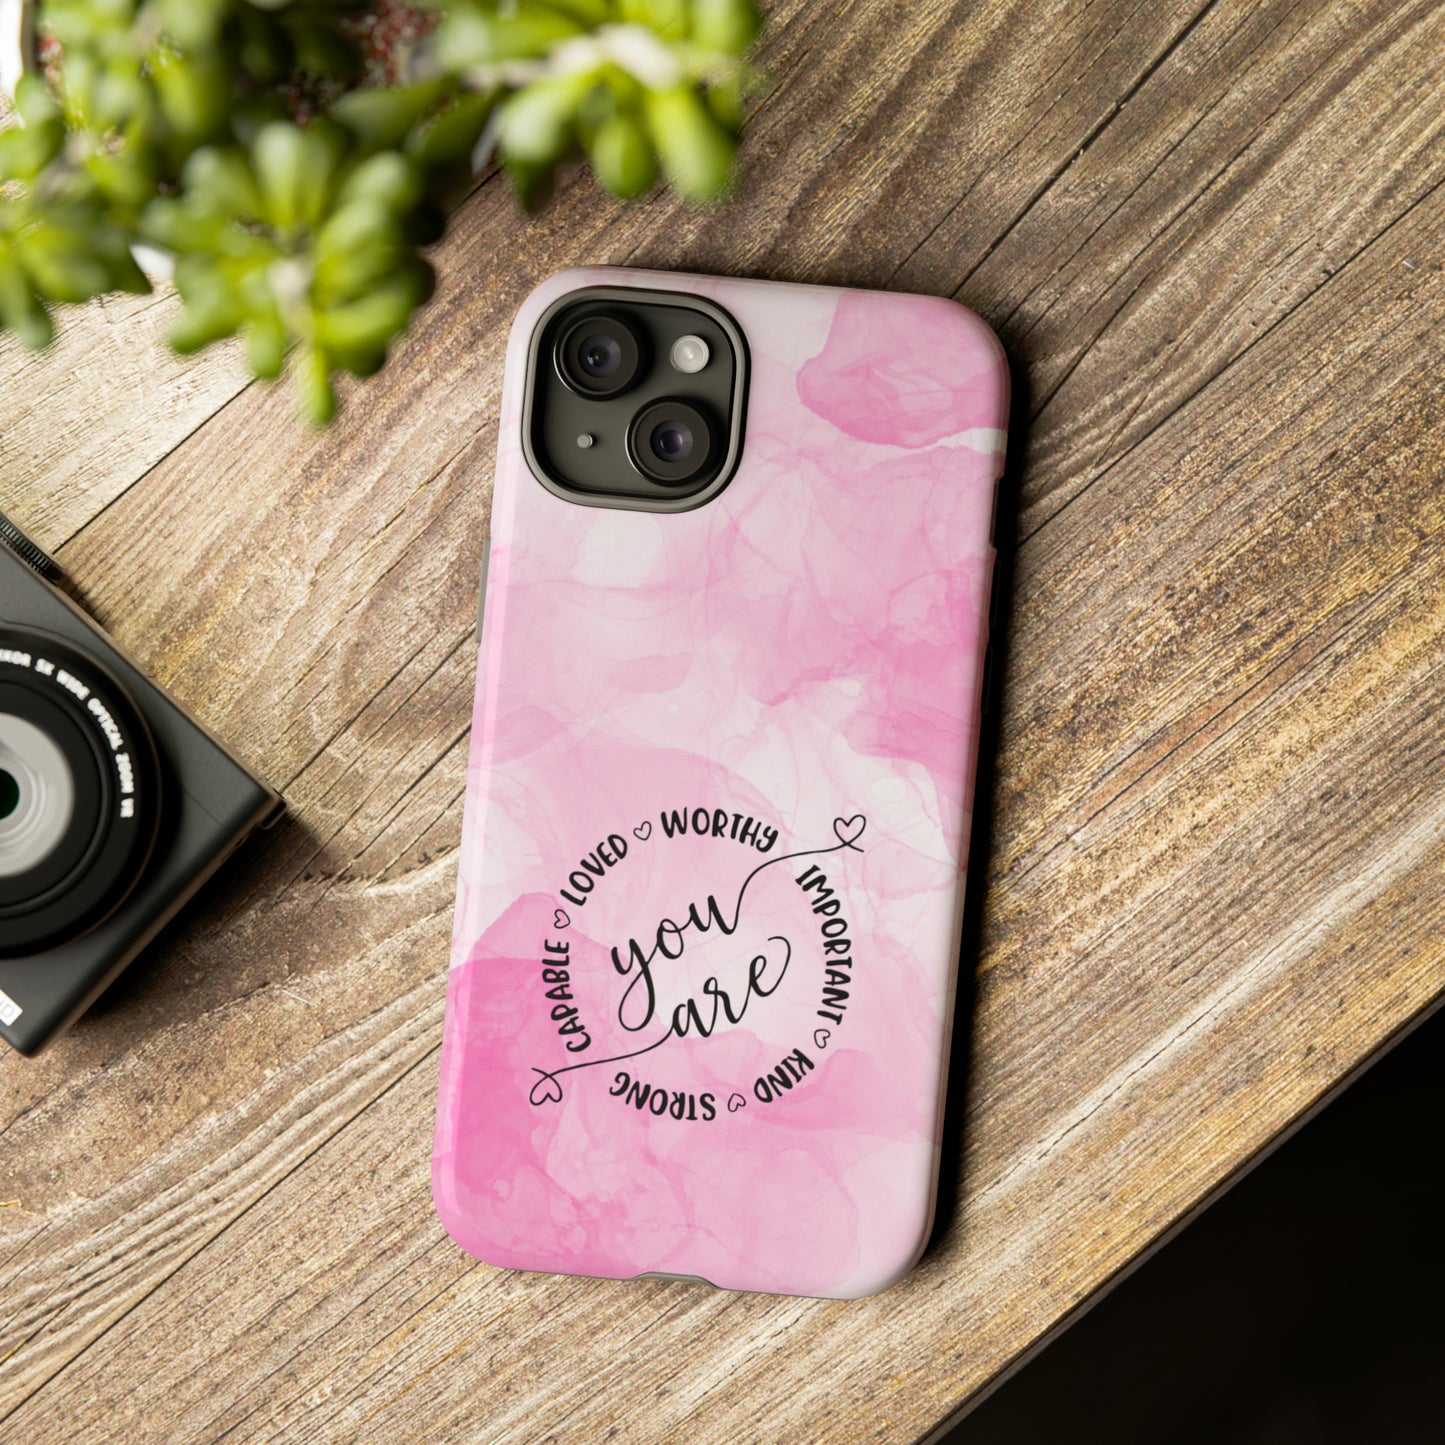 You Are IPhone Case, Inspiration IPhone Case, Phone Case, You Are Strong, Loved, Worthy, Important, Kind, Capable, Inspiring Message IPhone